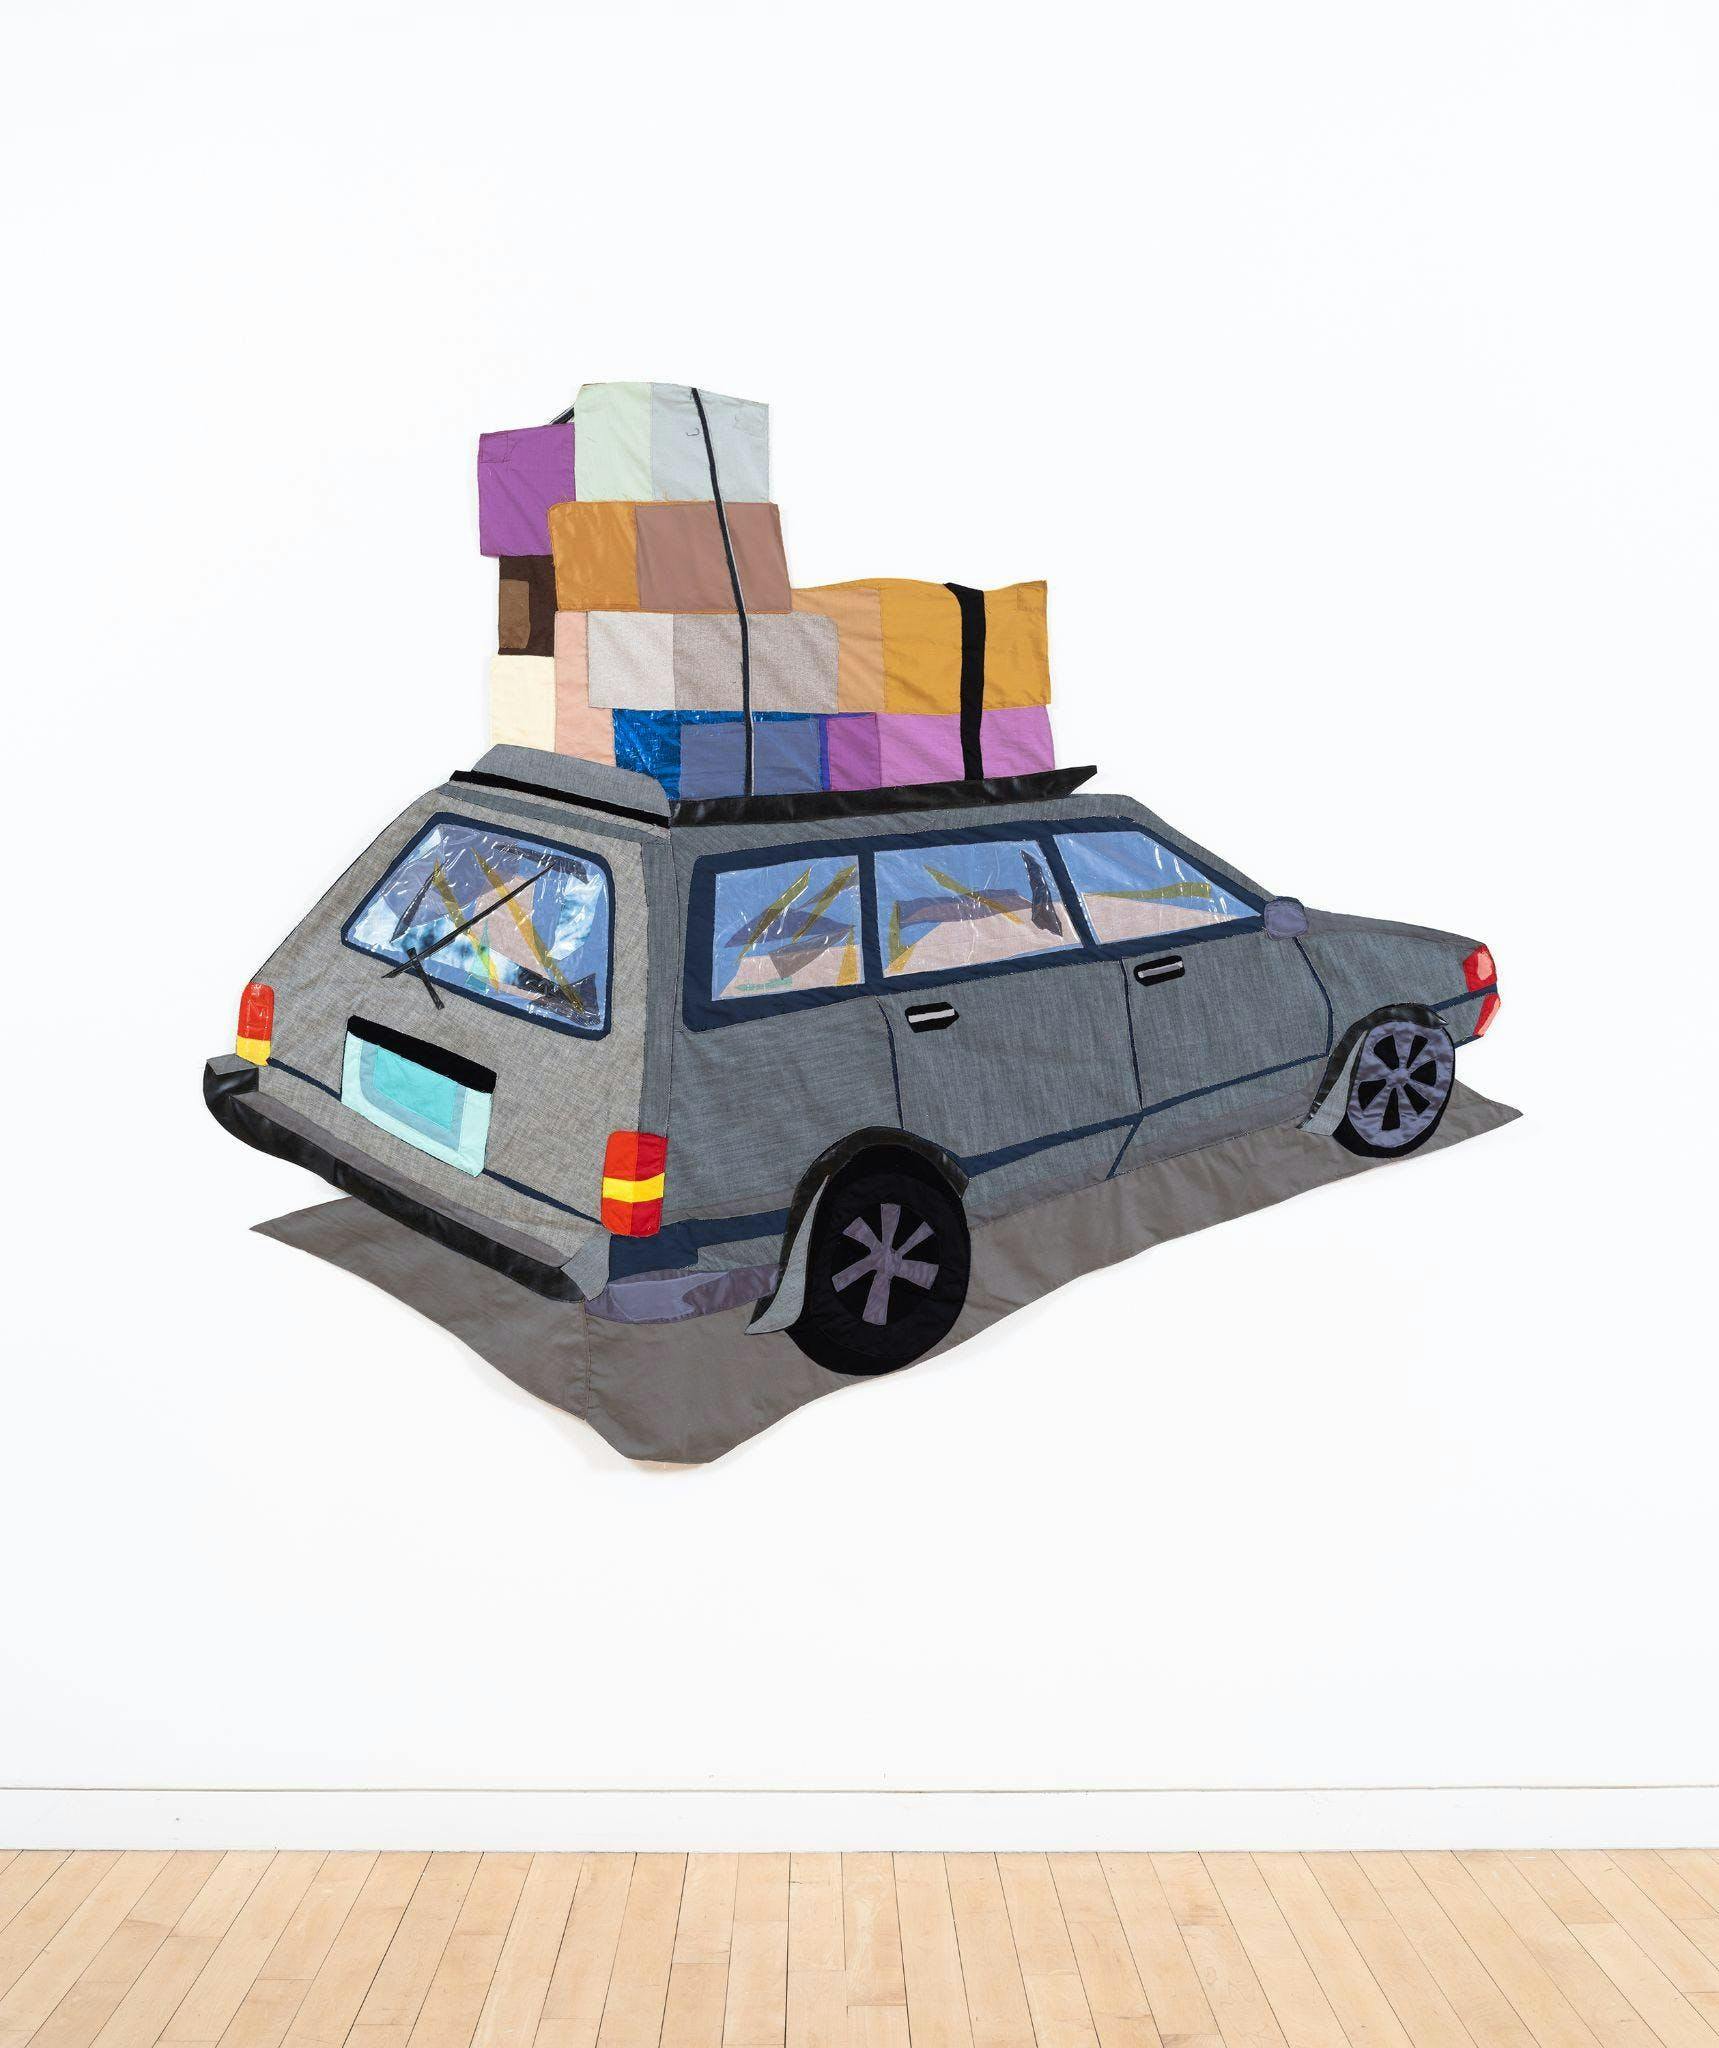 Textile artwork installed in a gallery depicting a car with boxes on top.